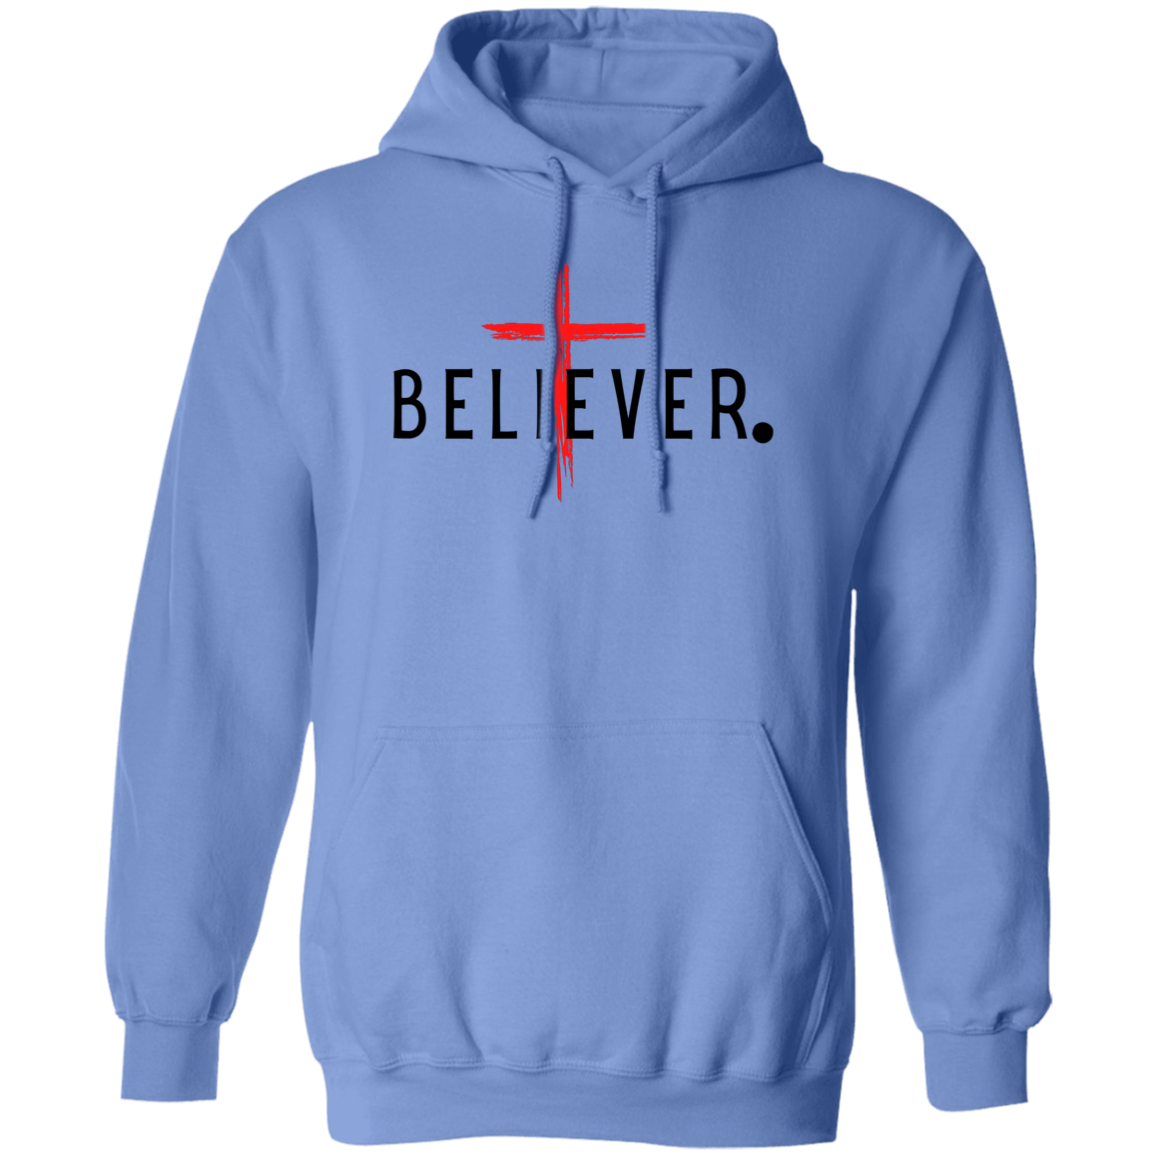 BELIEVER Pullover Hoodie Unisex Faith Casual Wear Gift For Her Gift Believe Gift For Him